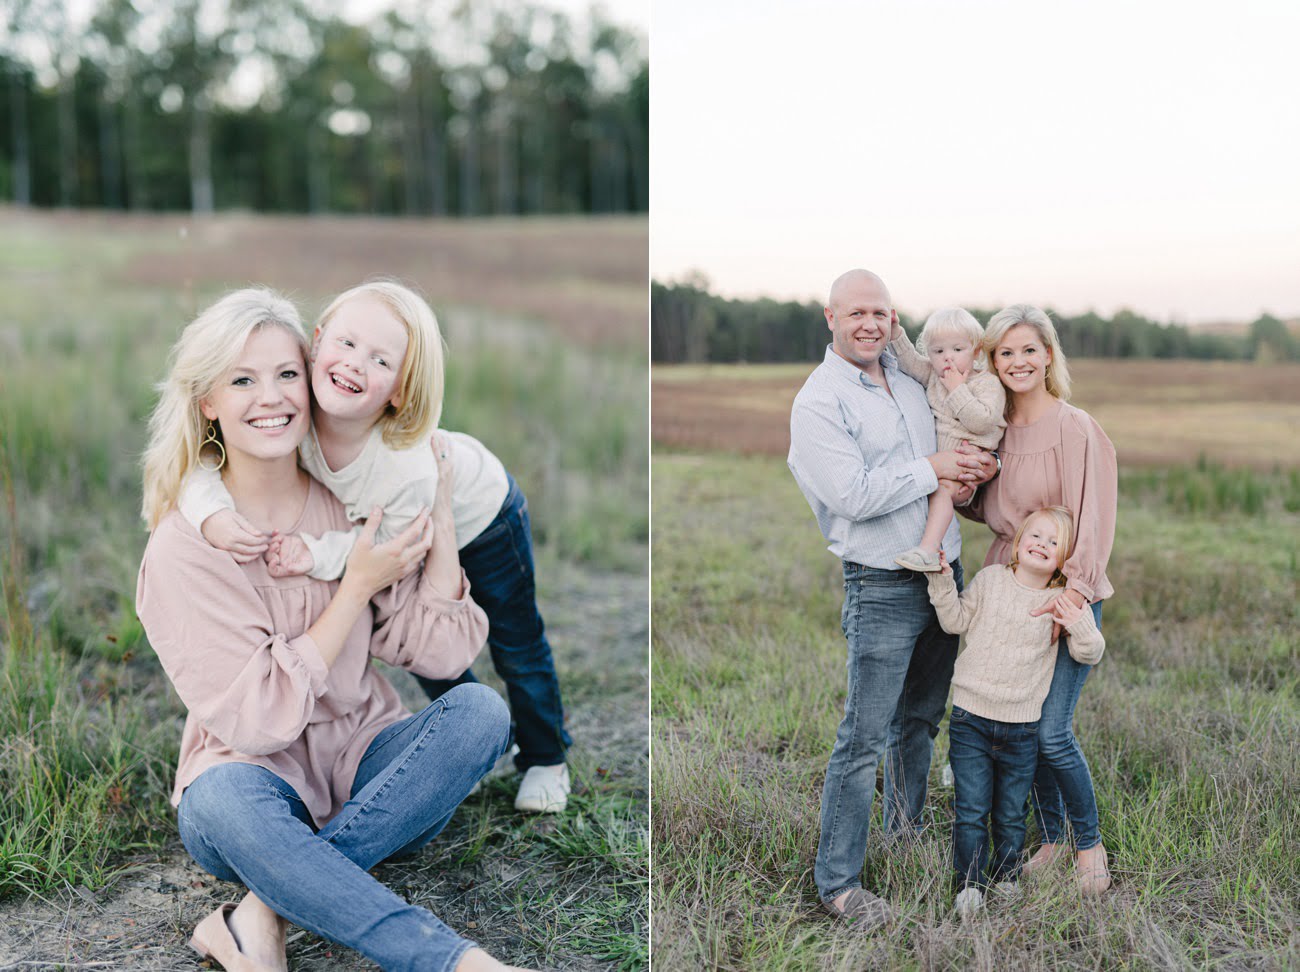 Family photography at Moss Rock Preserve in Birmingham, AL